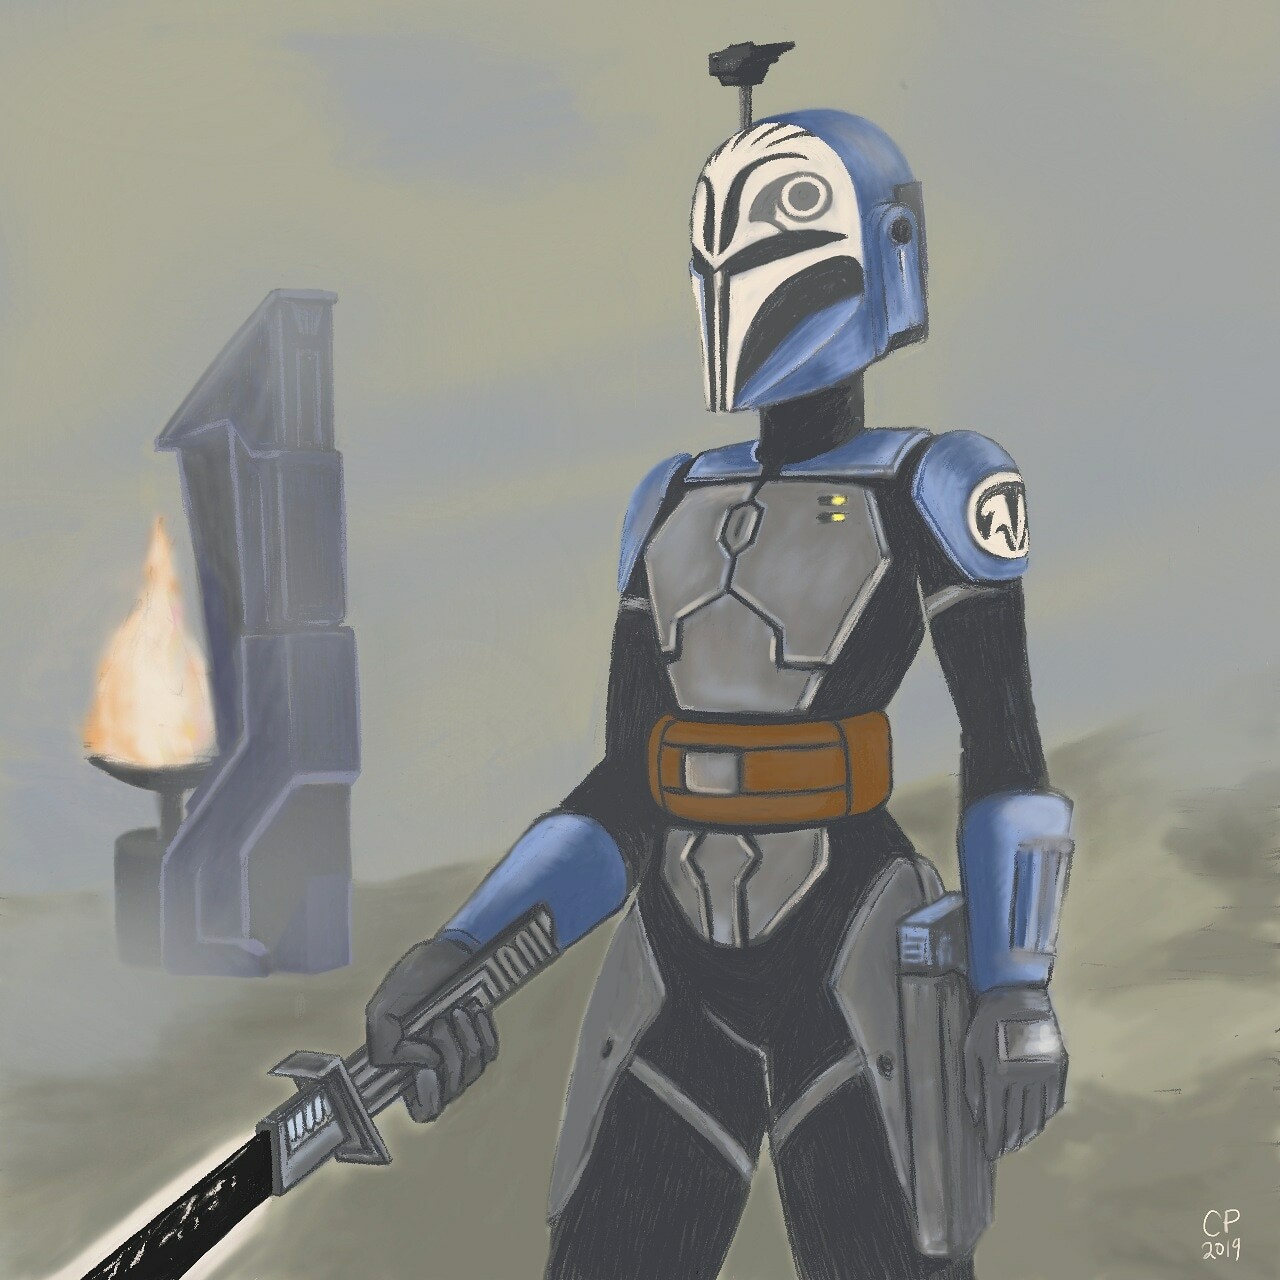 The Flower of Mandalore. A fan art of Bo-Katan Kryse with the darksaber. 